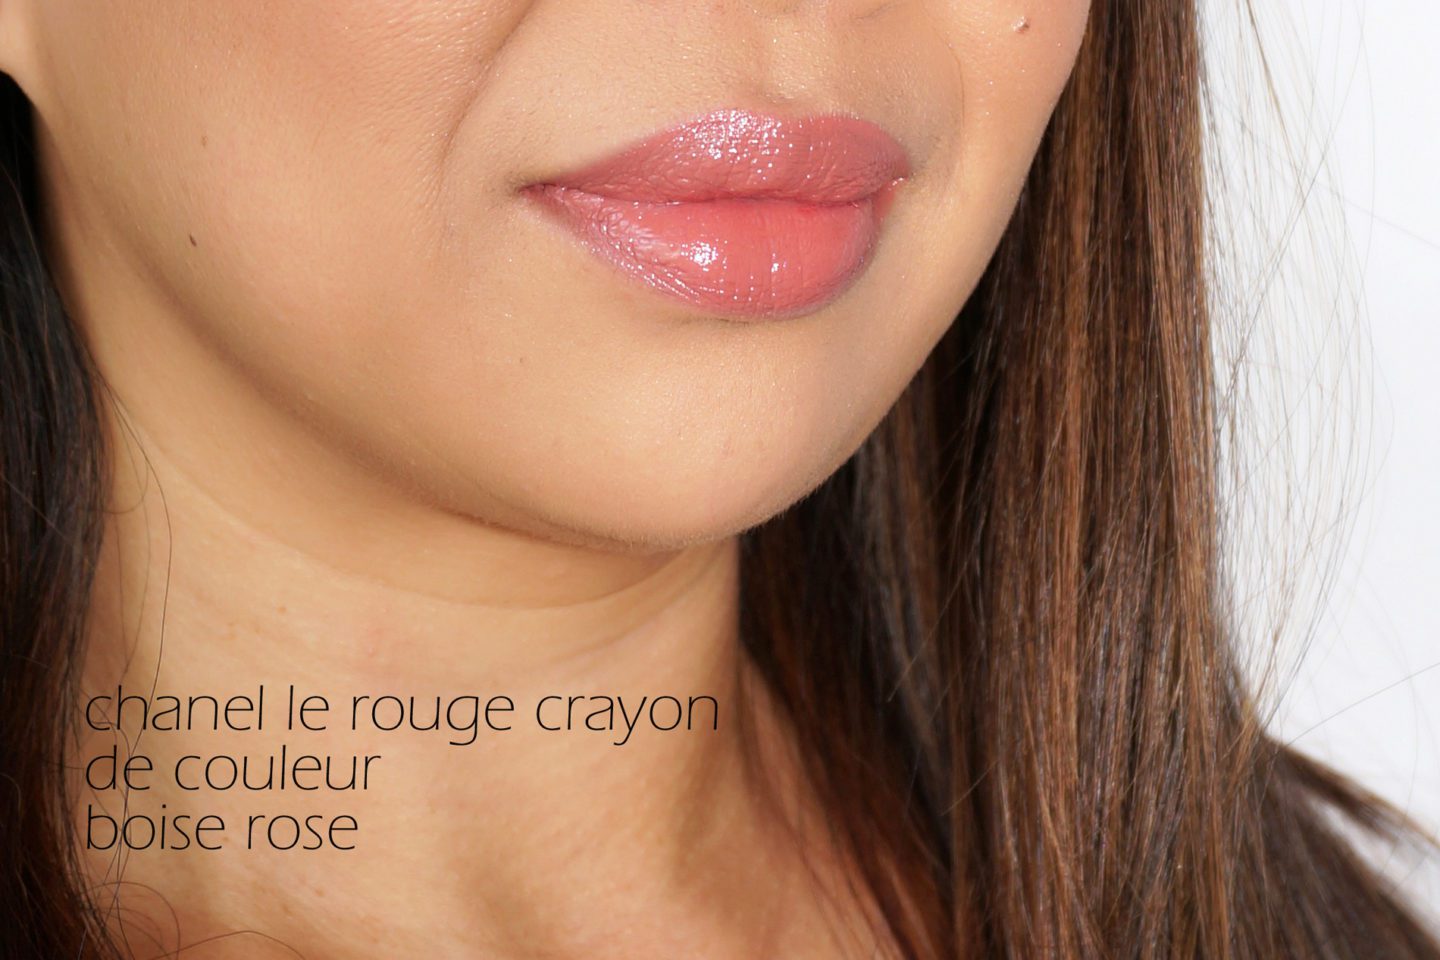 Chanel Le Rouge Crayon in Bois Rose